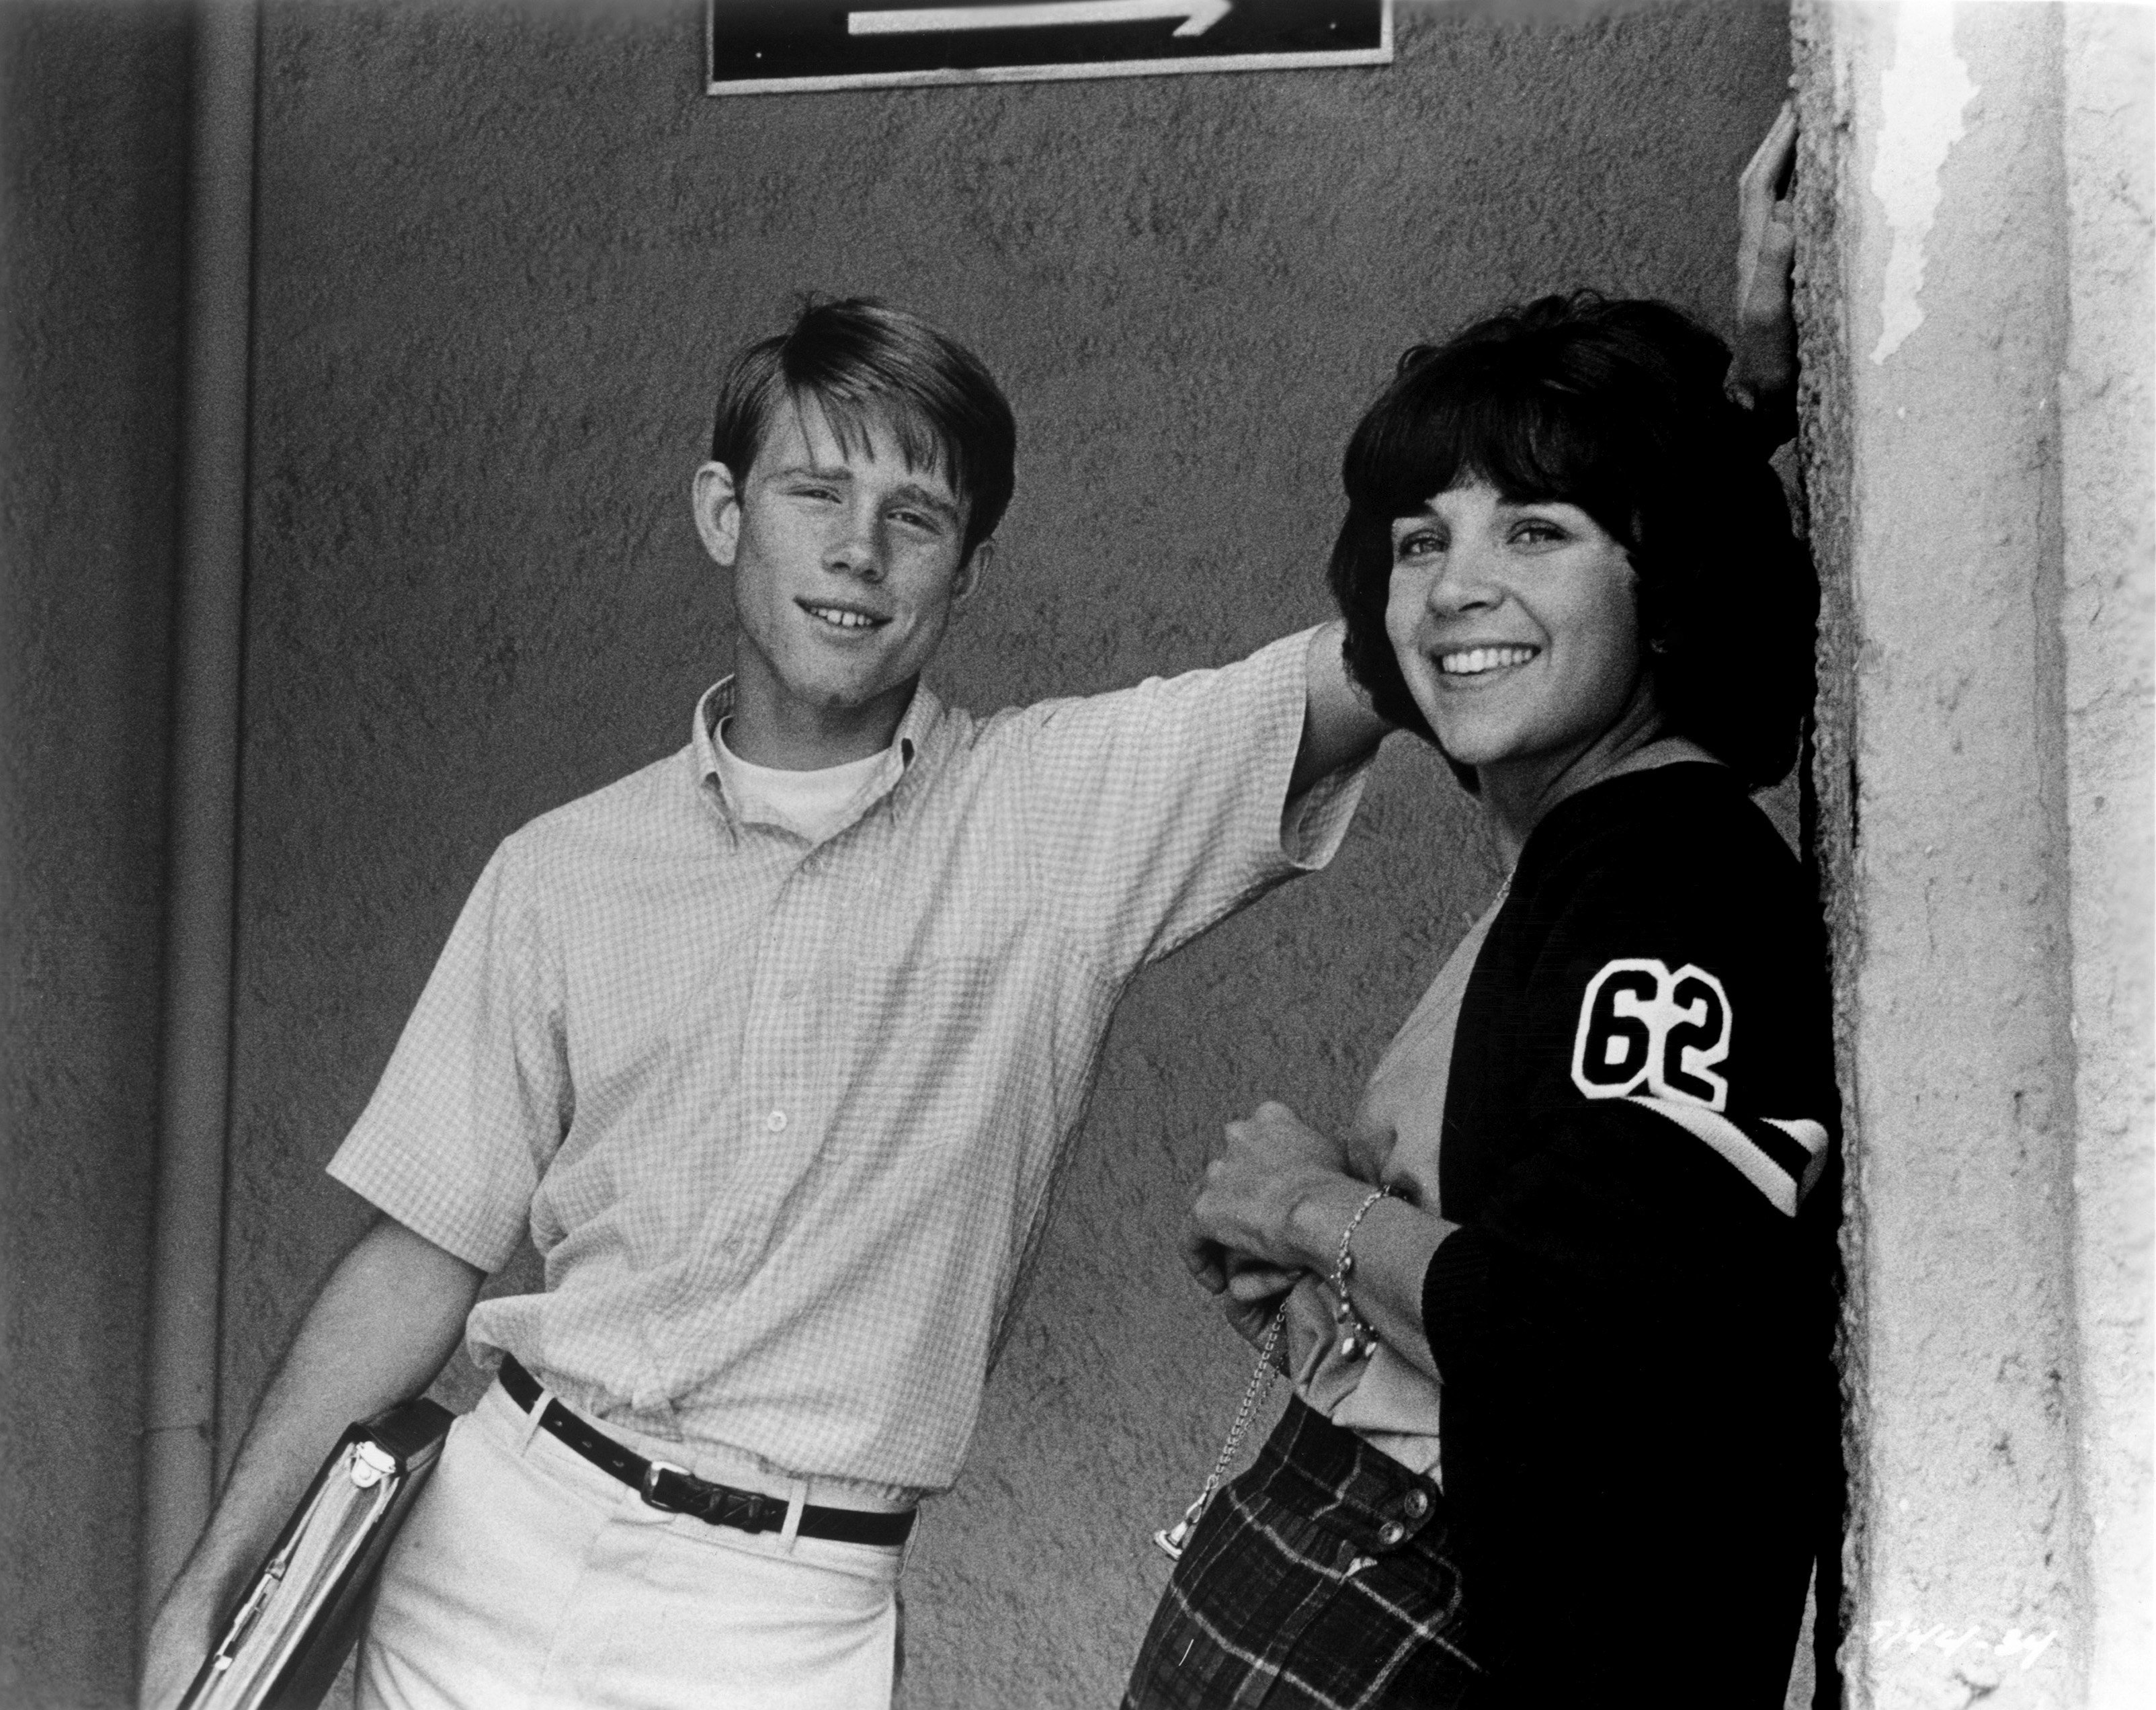 Ron Howard and Cindy Williams shooting "American Graffiti" in 1973 in Northern California | Source: Getty Images